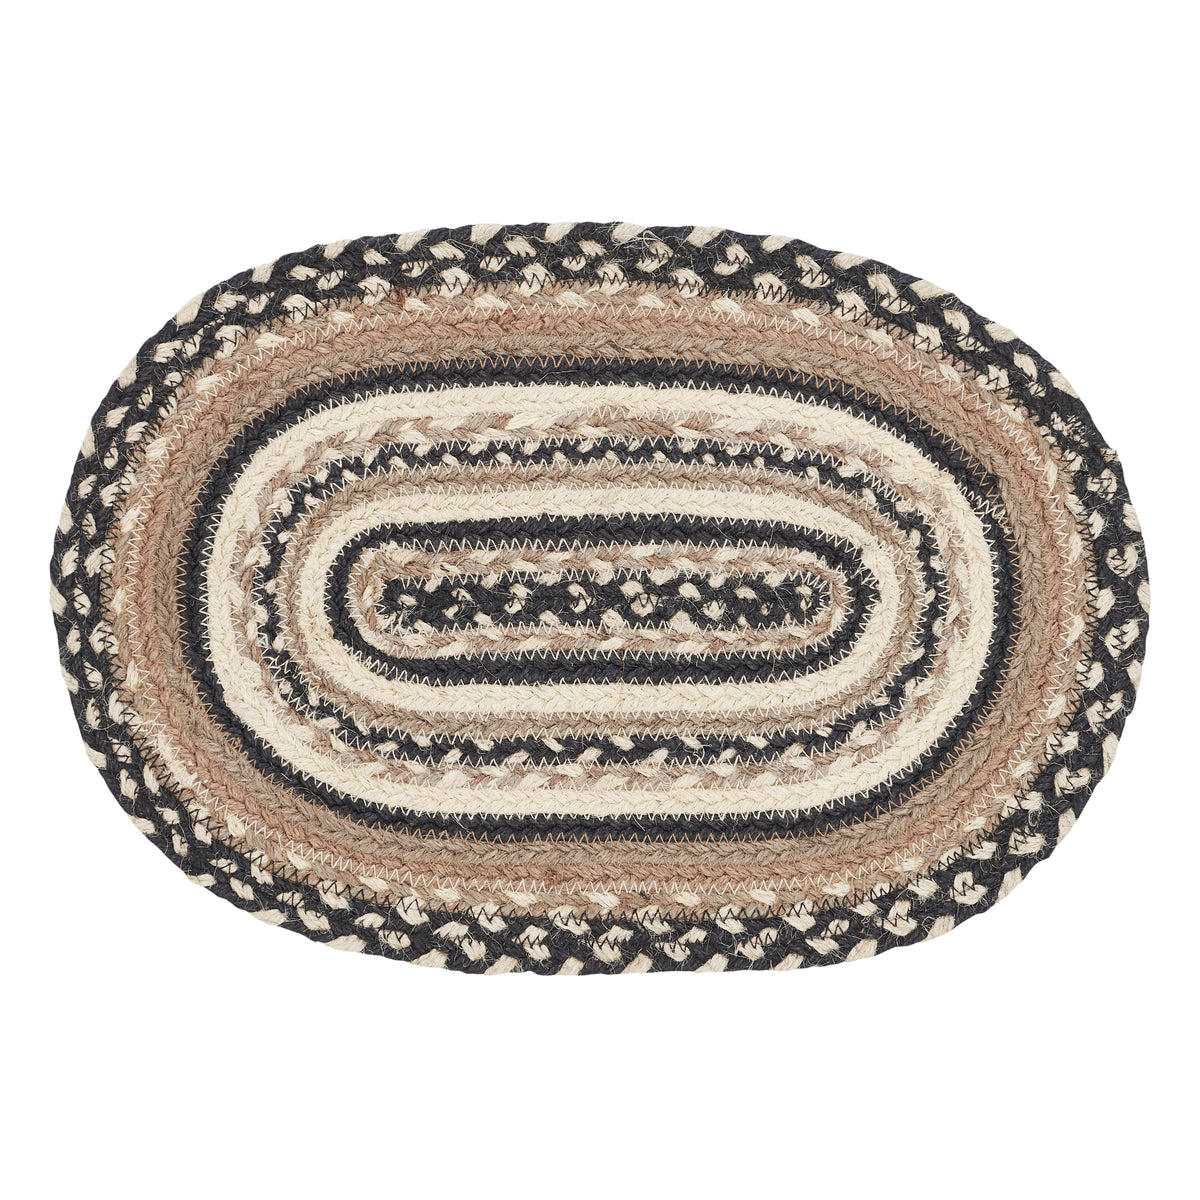 Sawyer Mill Charcoal Creme Jute Oval Placemat 10x15